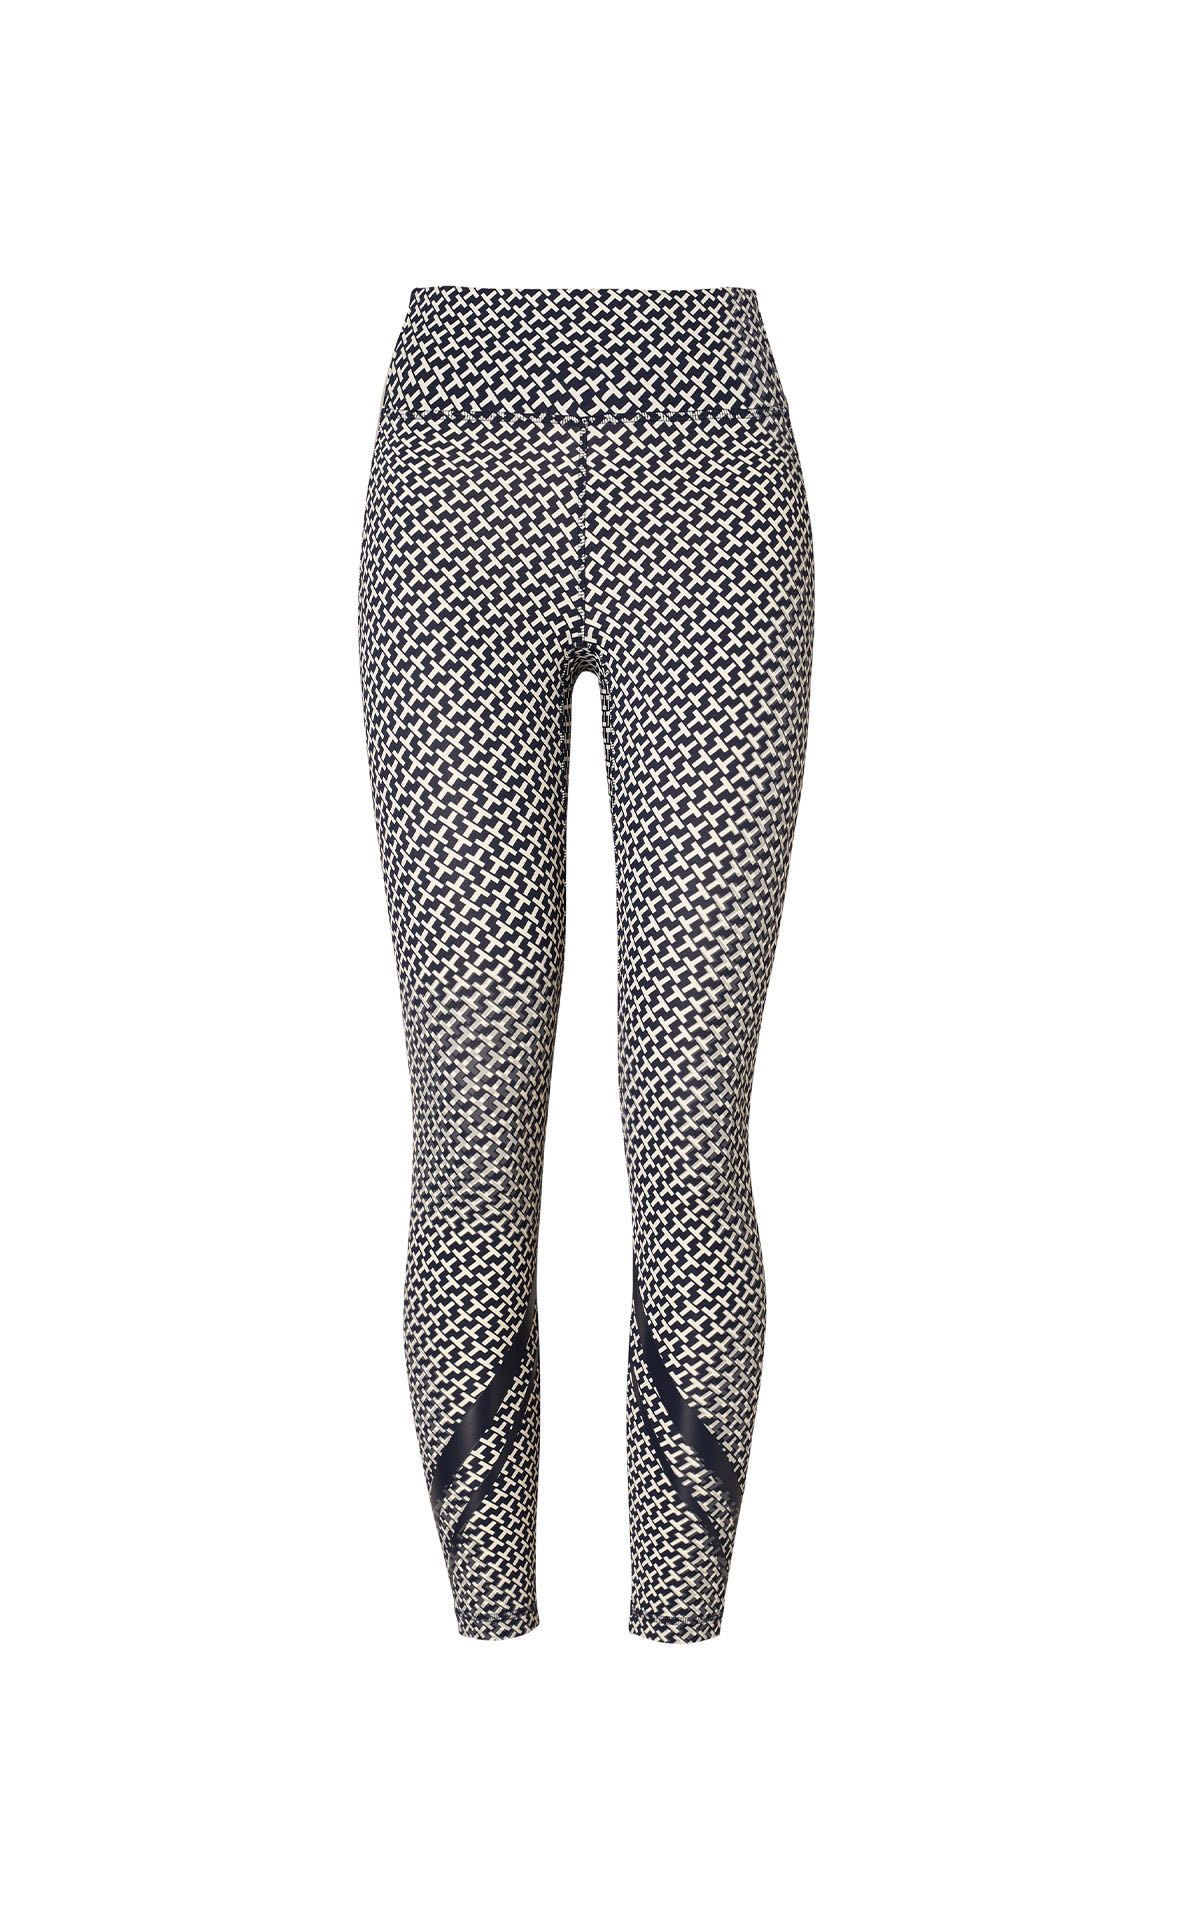 Tory Burch Printed high-rise weightless leggings from Bicester Village